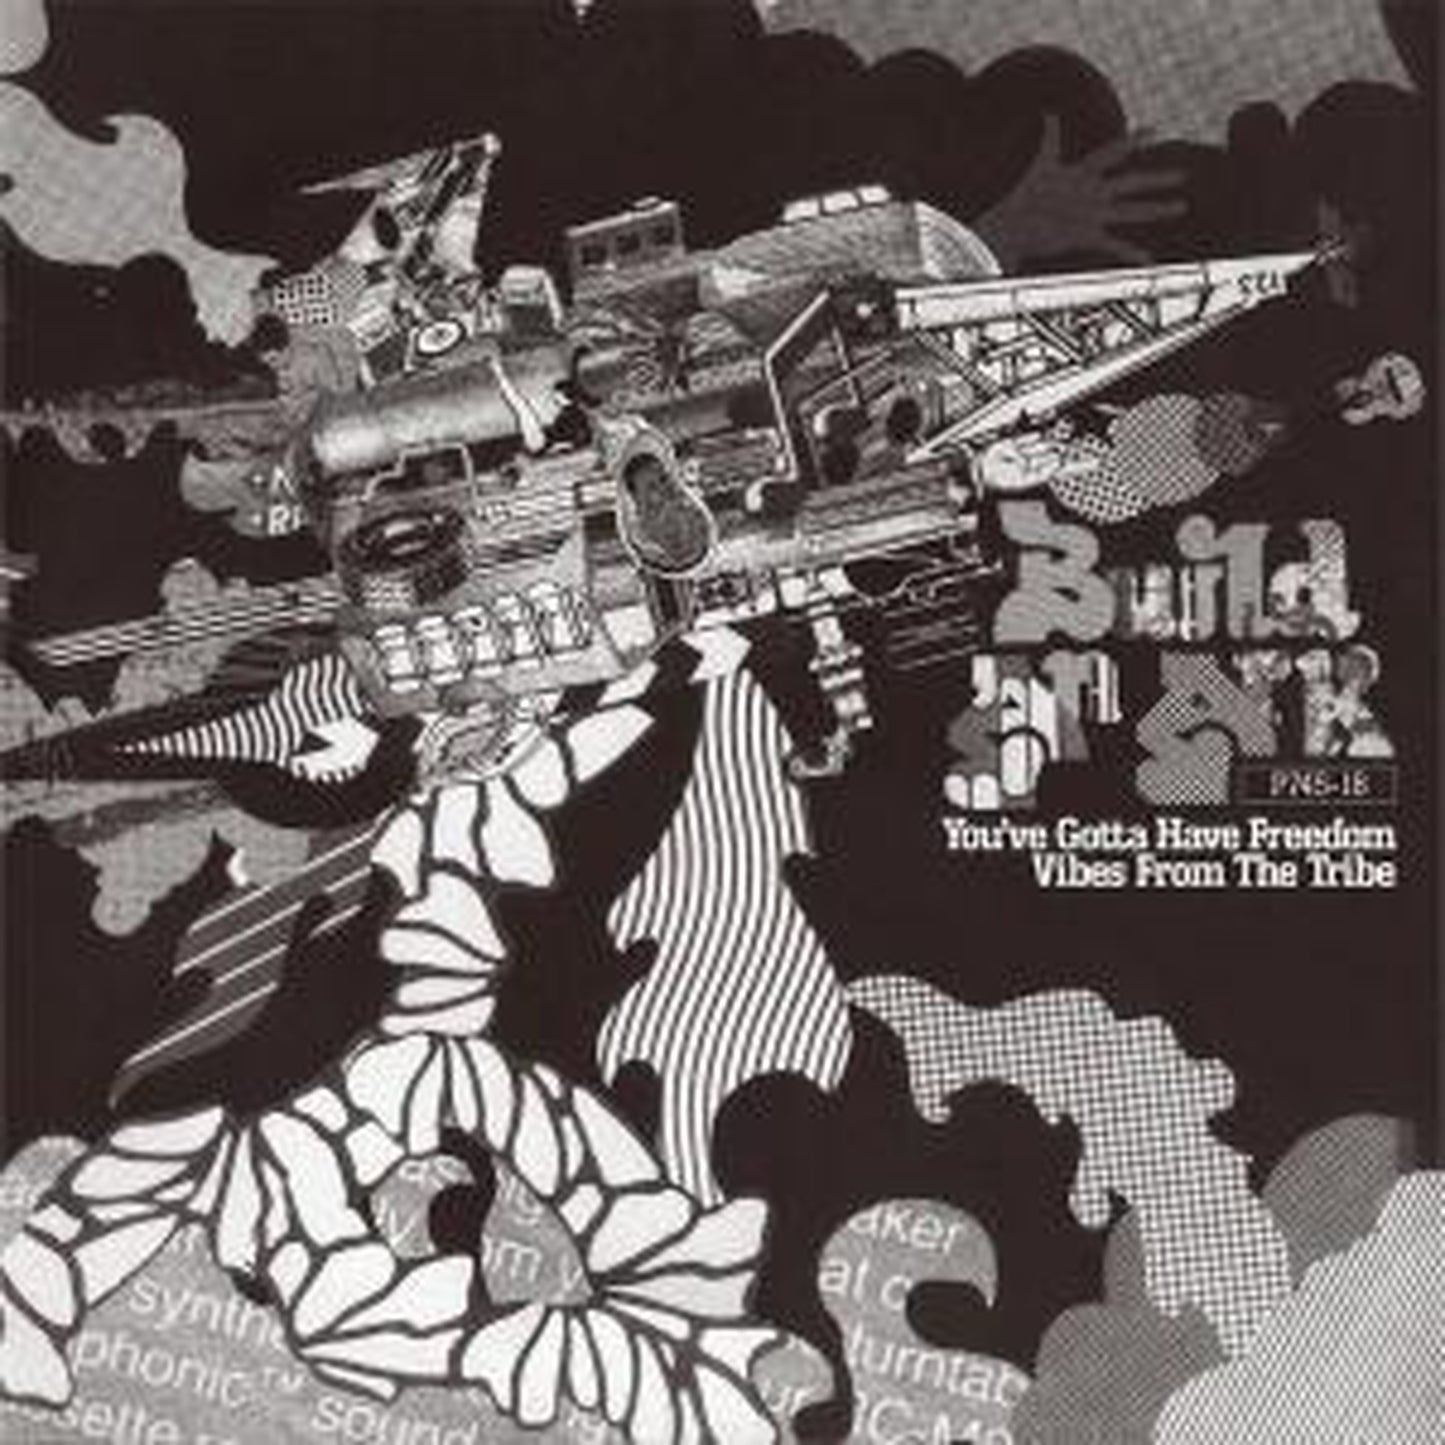 【7"】BUILD AN ARK - You've Gotta Have Freedom / Vibes From The Tribe